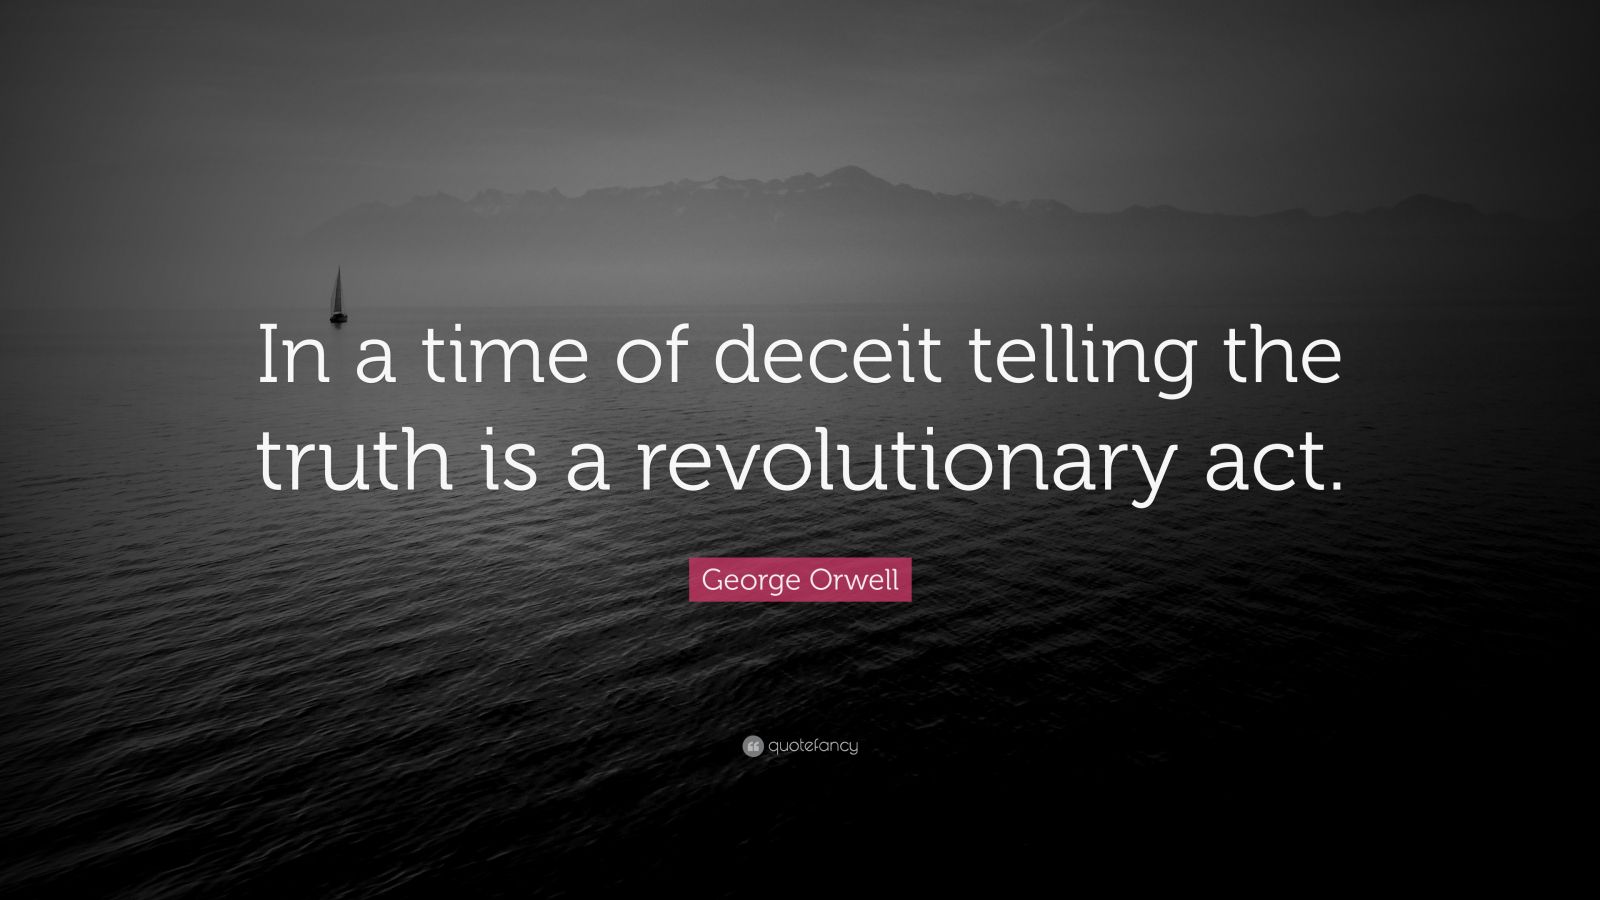 George Orwell Quote: "In a time of deceit telling the ...